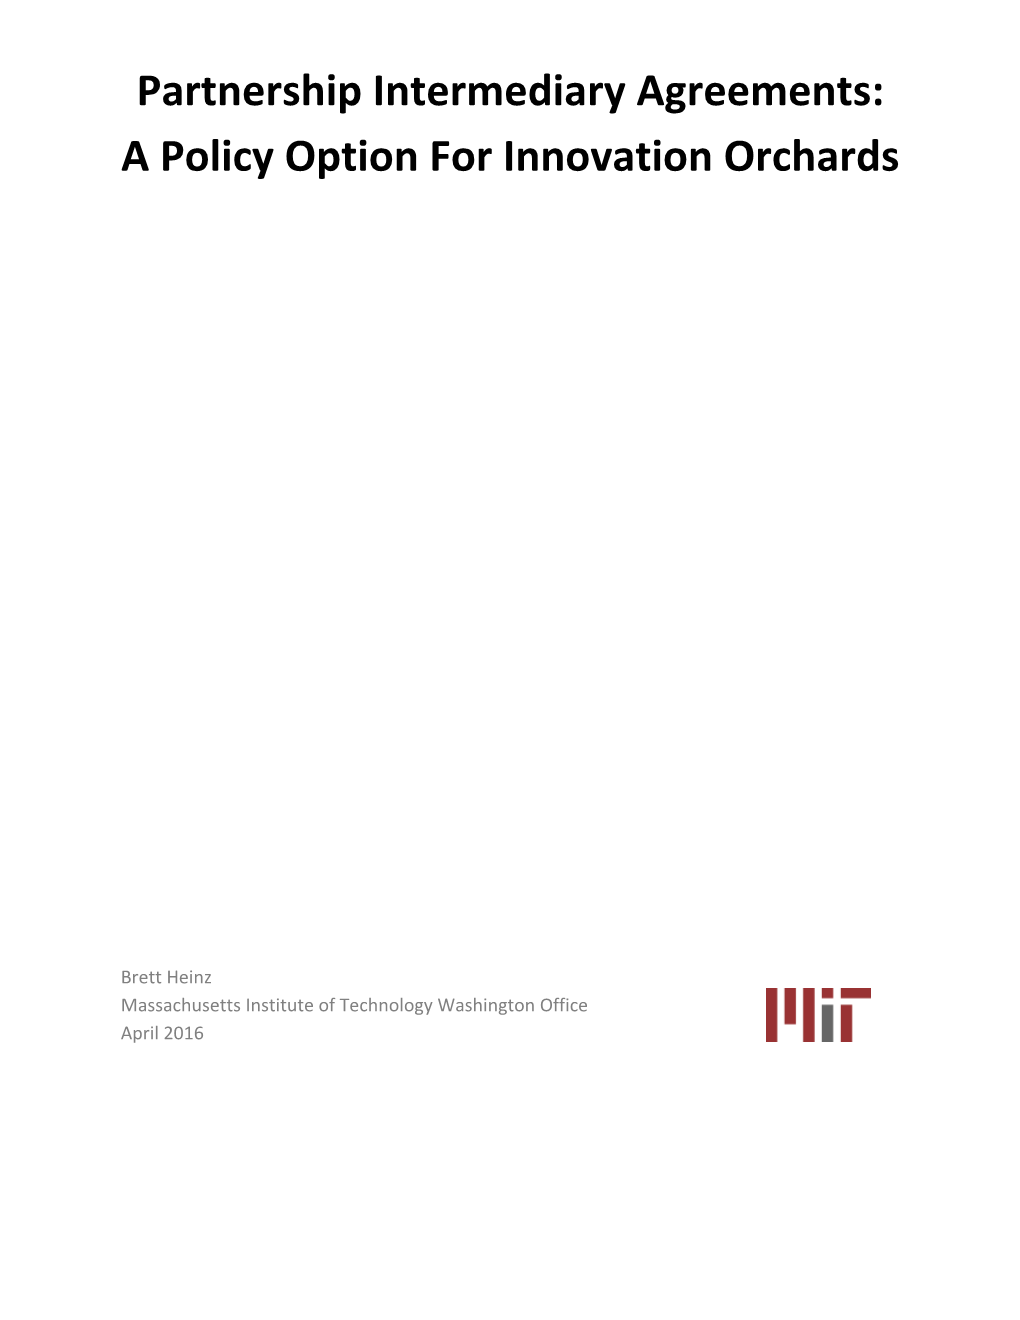 Partnership Intermediary Agreements: a Policy Option for Innovation Orchards